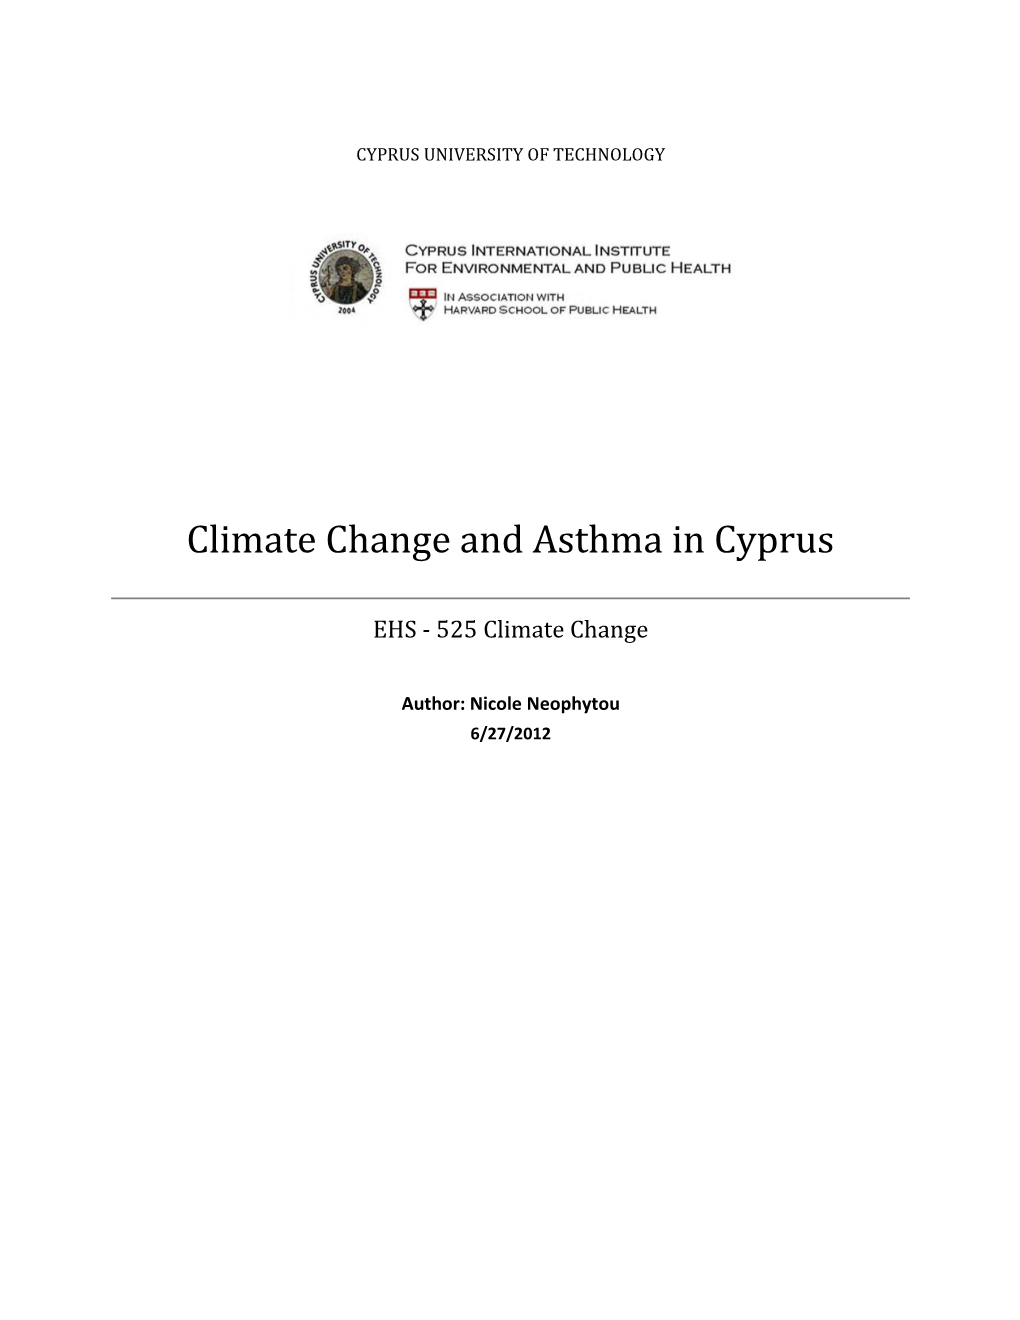 Climate Change and Asthma in Cyprus